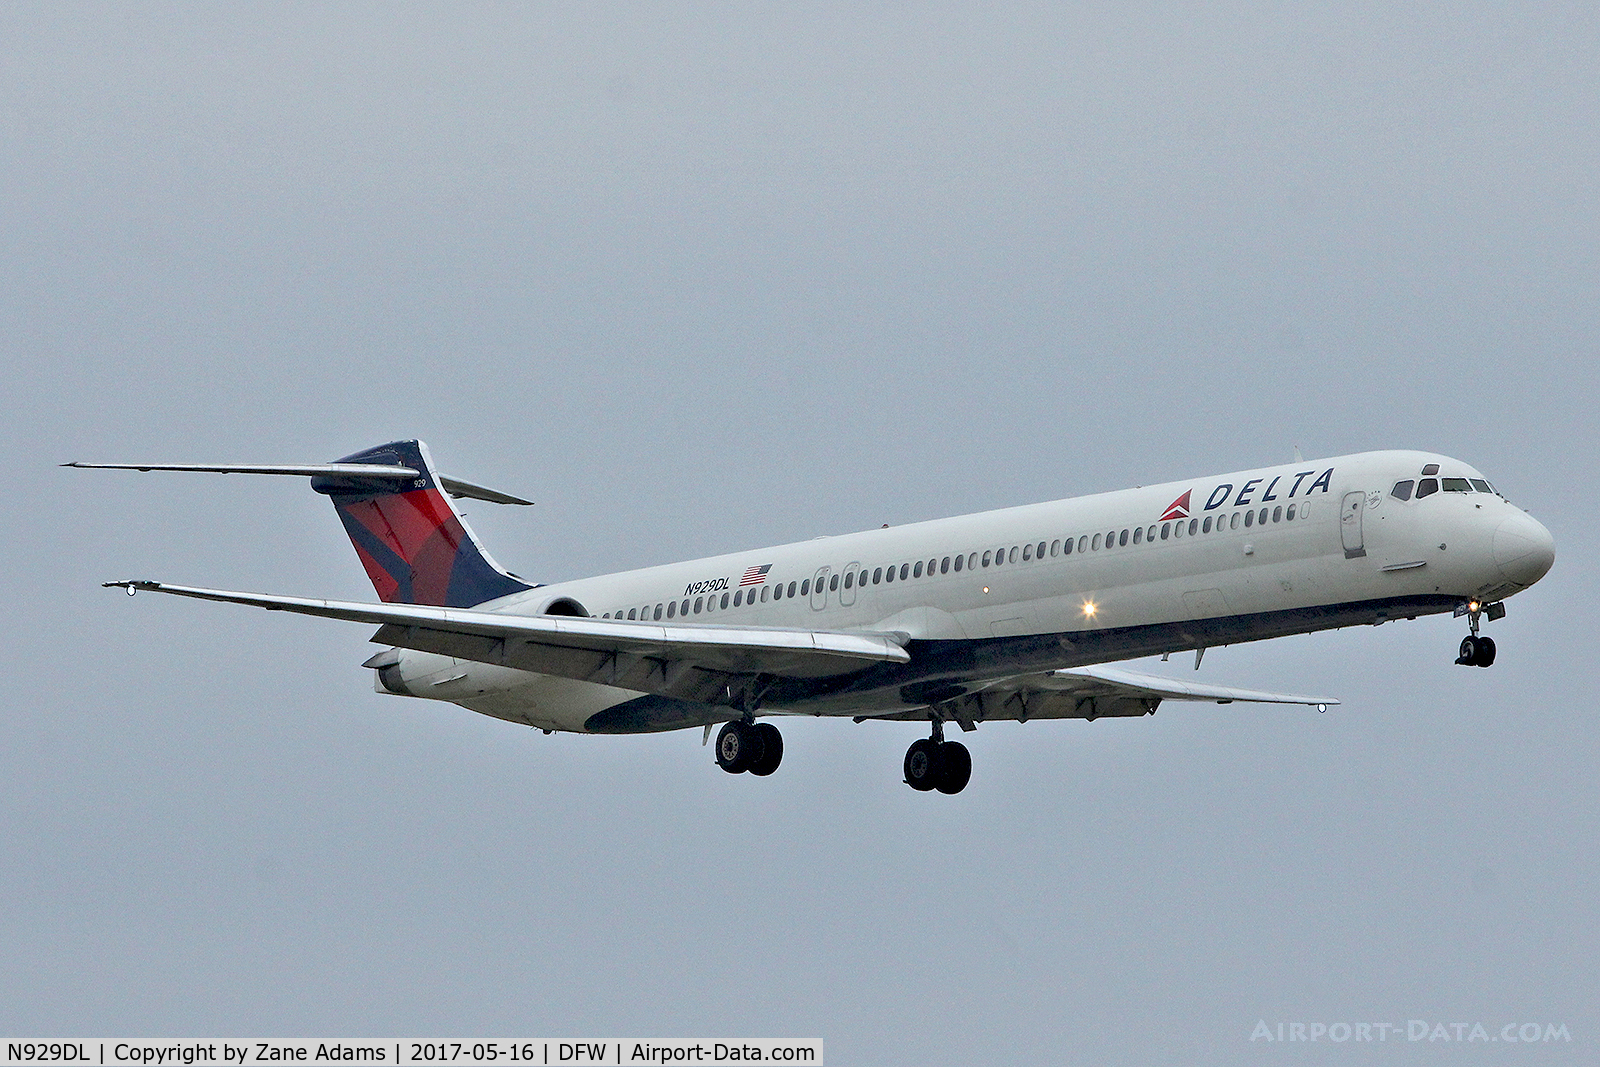 N929DL, 1988 McDonnell Douglas MD-88 C/N 49716, Arriving at DFW Airport